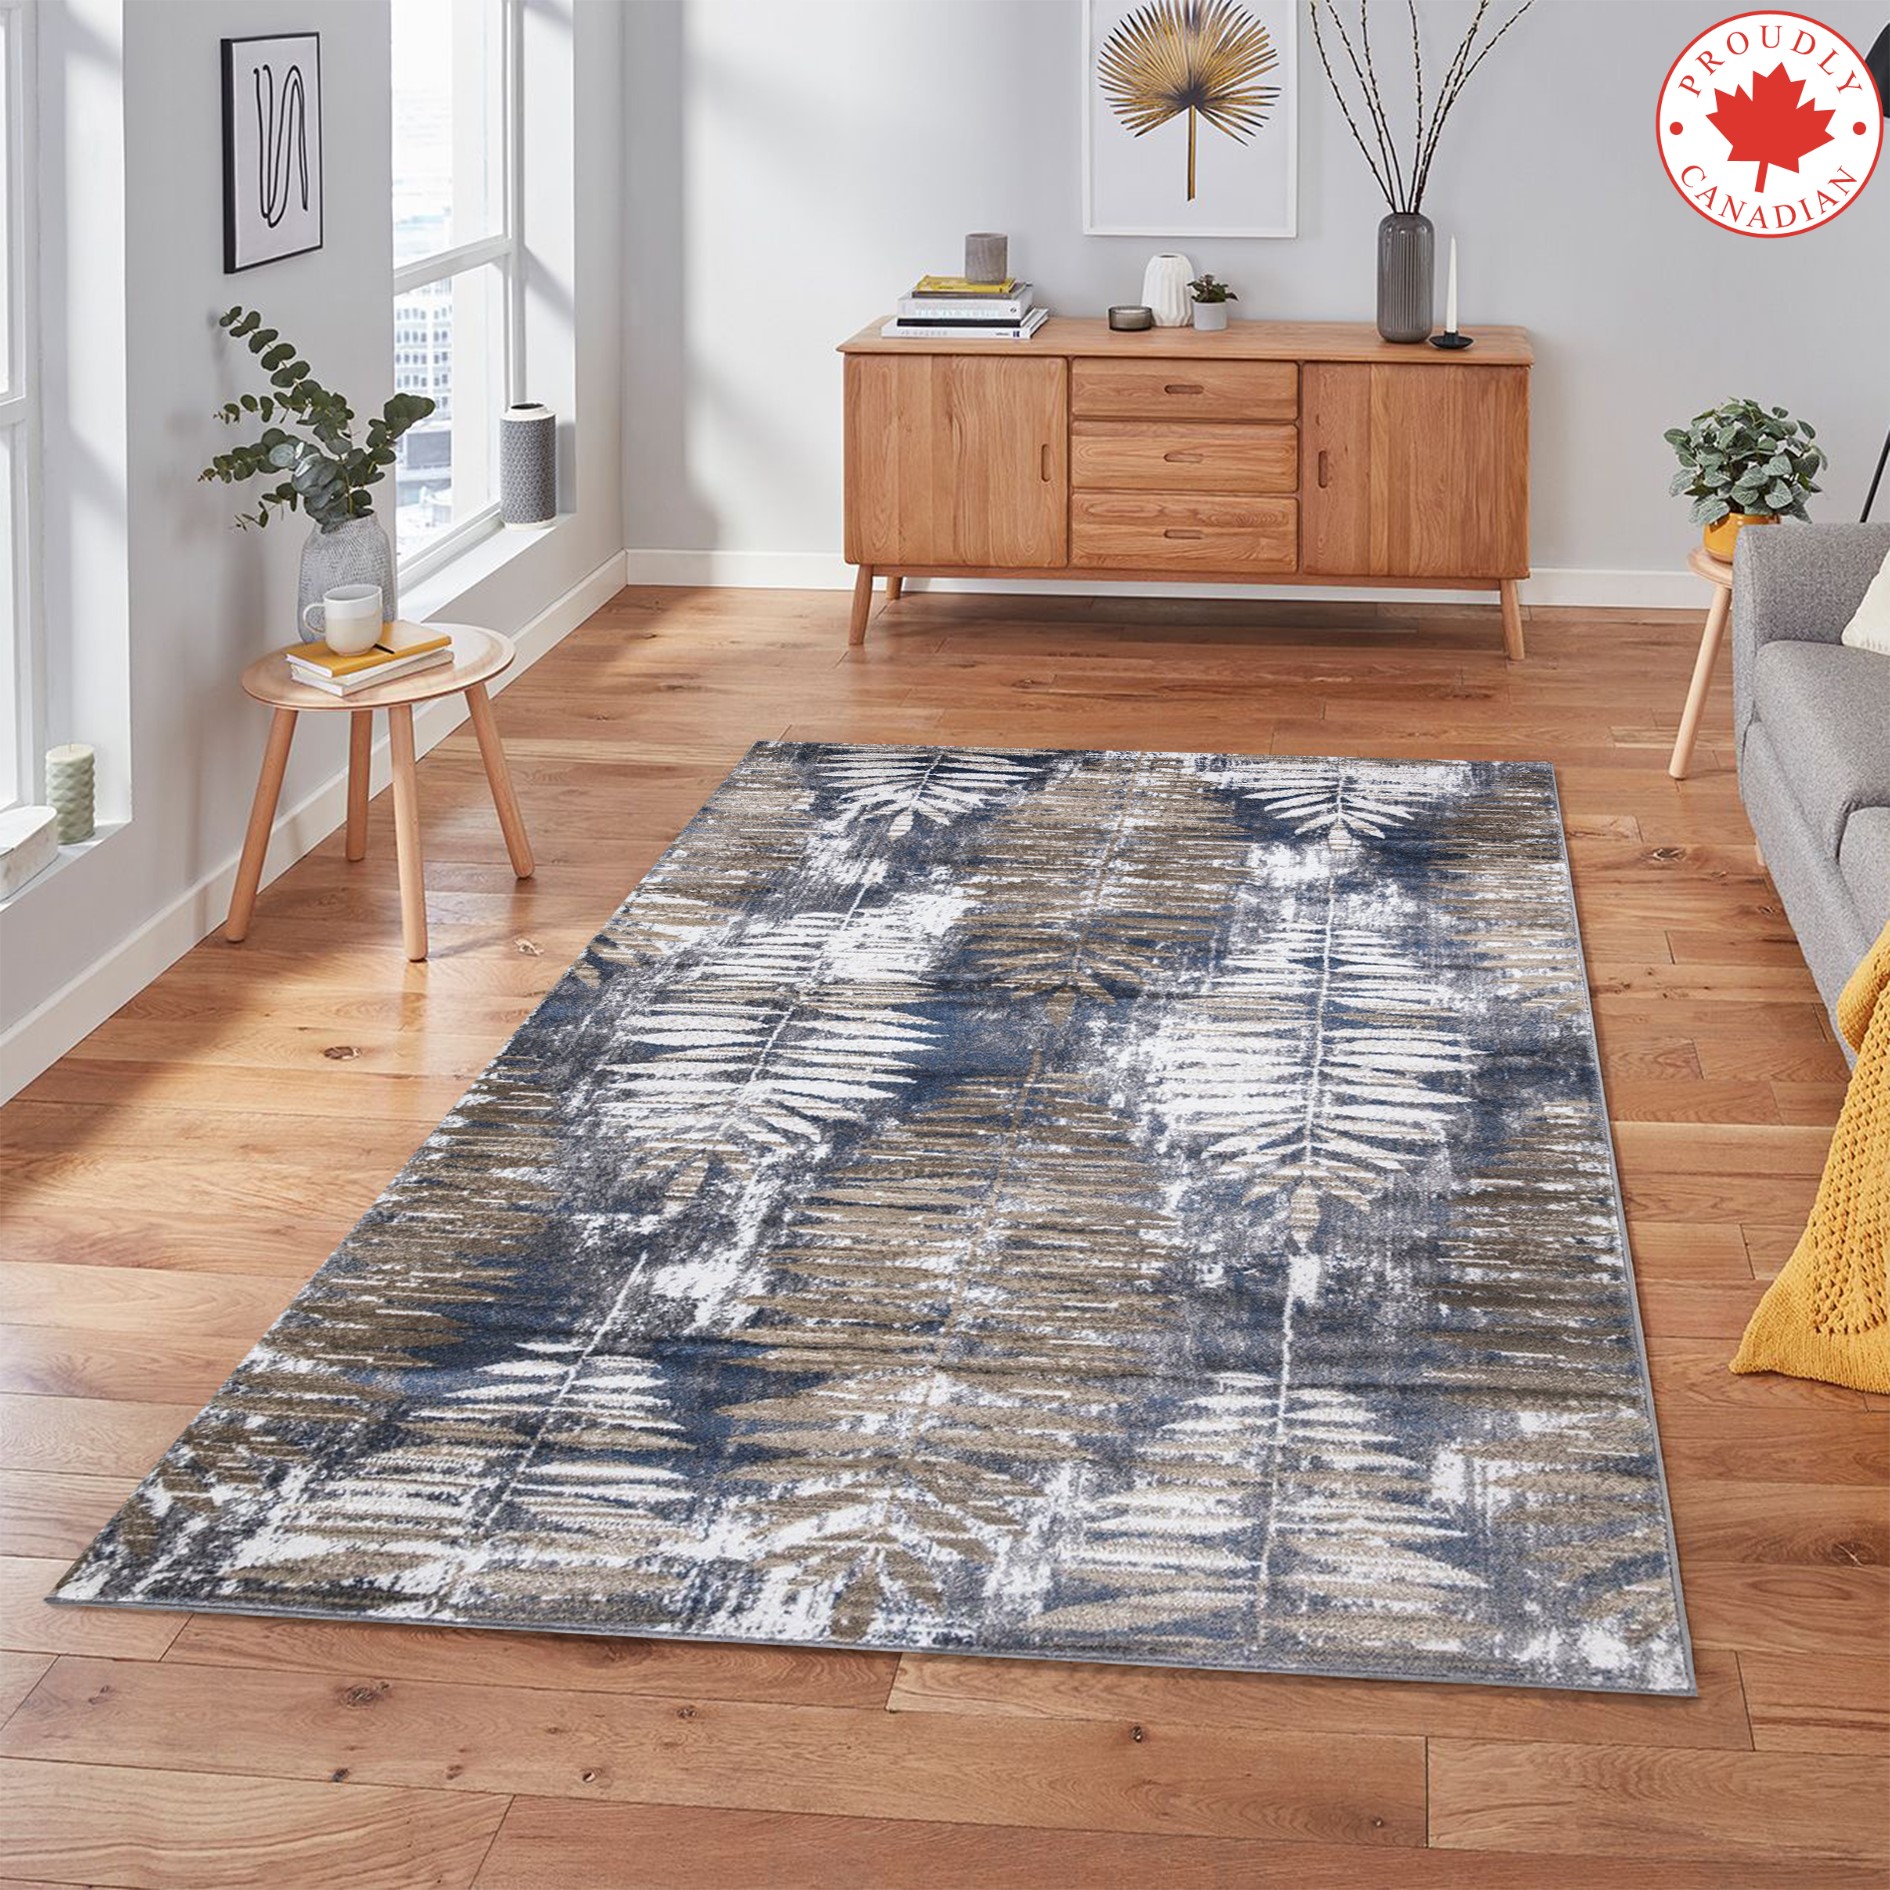 A2Z Paris 1941 Abstract Contemporary Distressed Leaf Floral Designer  Stylish Soft Bedroom Dining Room Hallway Living Room Area Rug Tapis  Carpet (3x5 2x7 4x6 5x7 5x8 7x9 8x10)